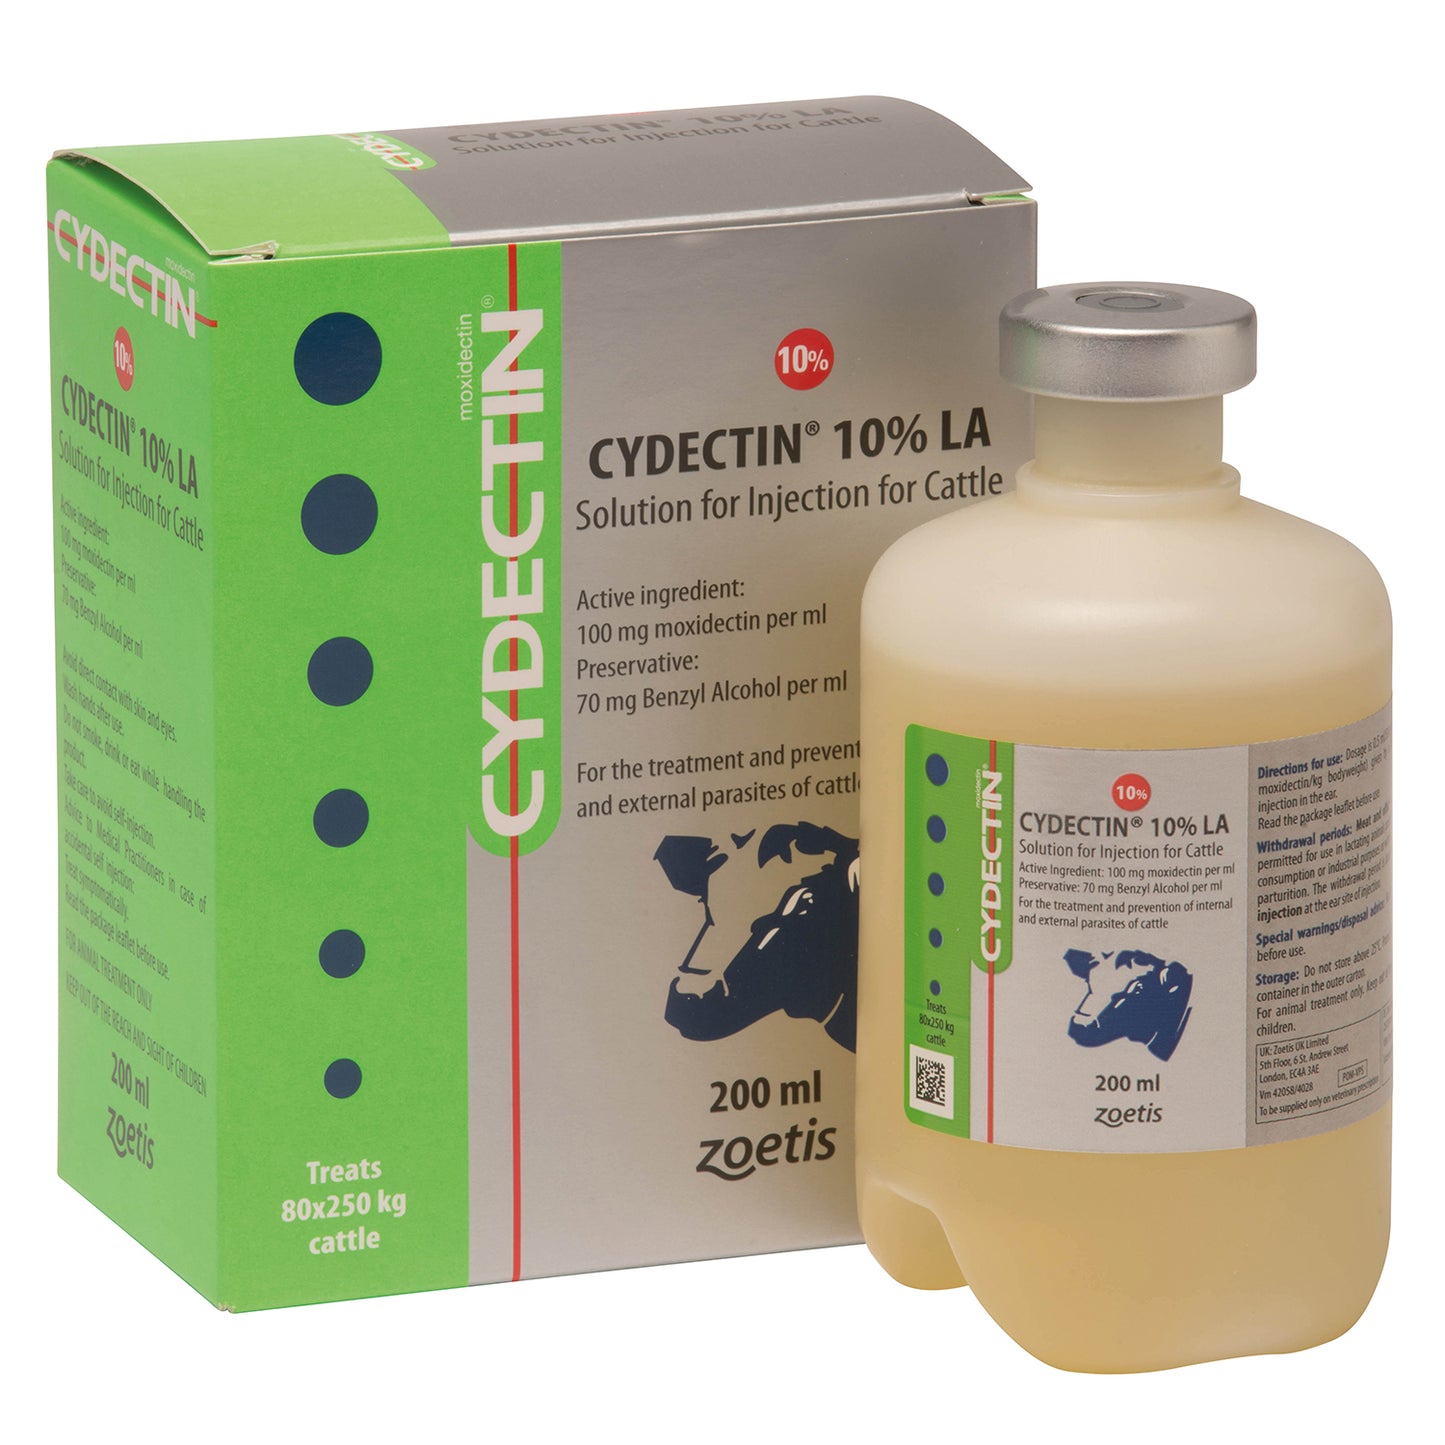 Cydectin 10% LA Solution for Injection for Cattle